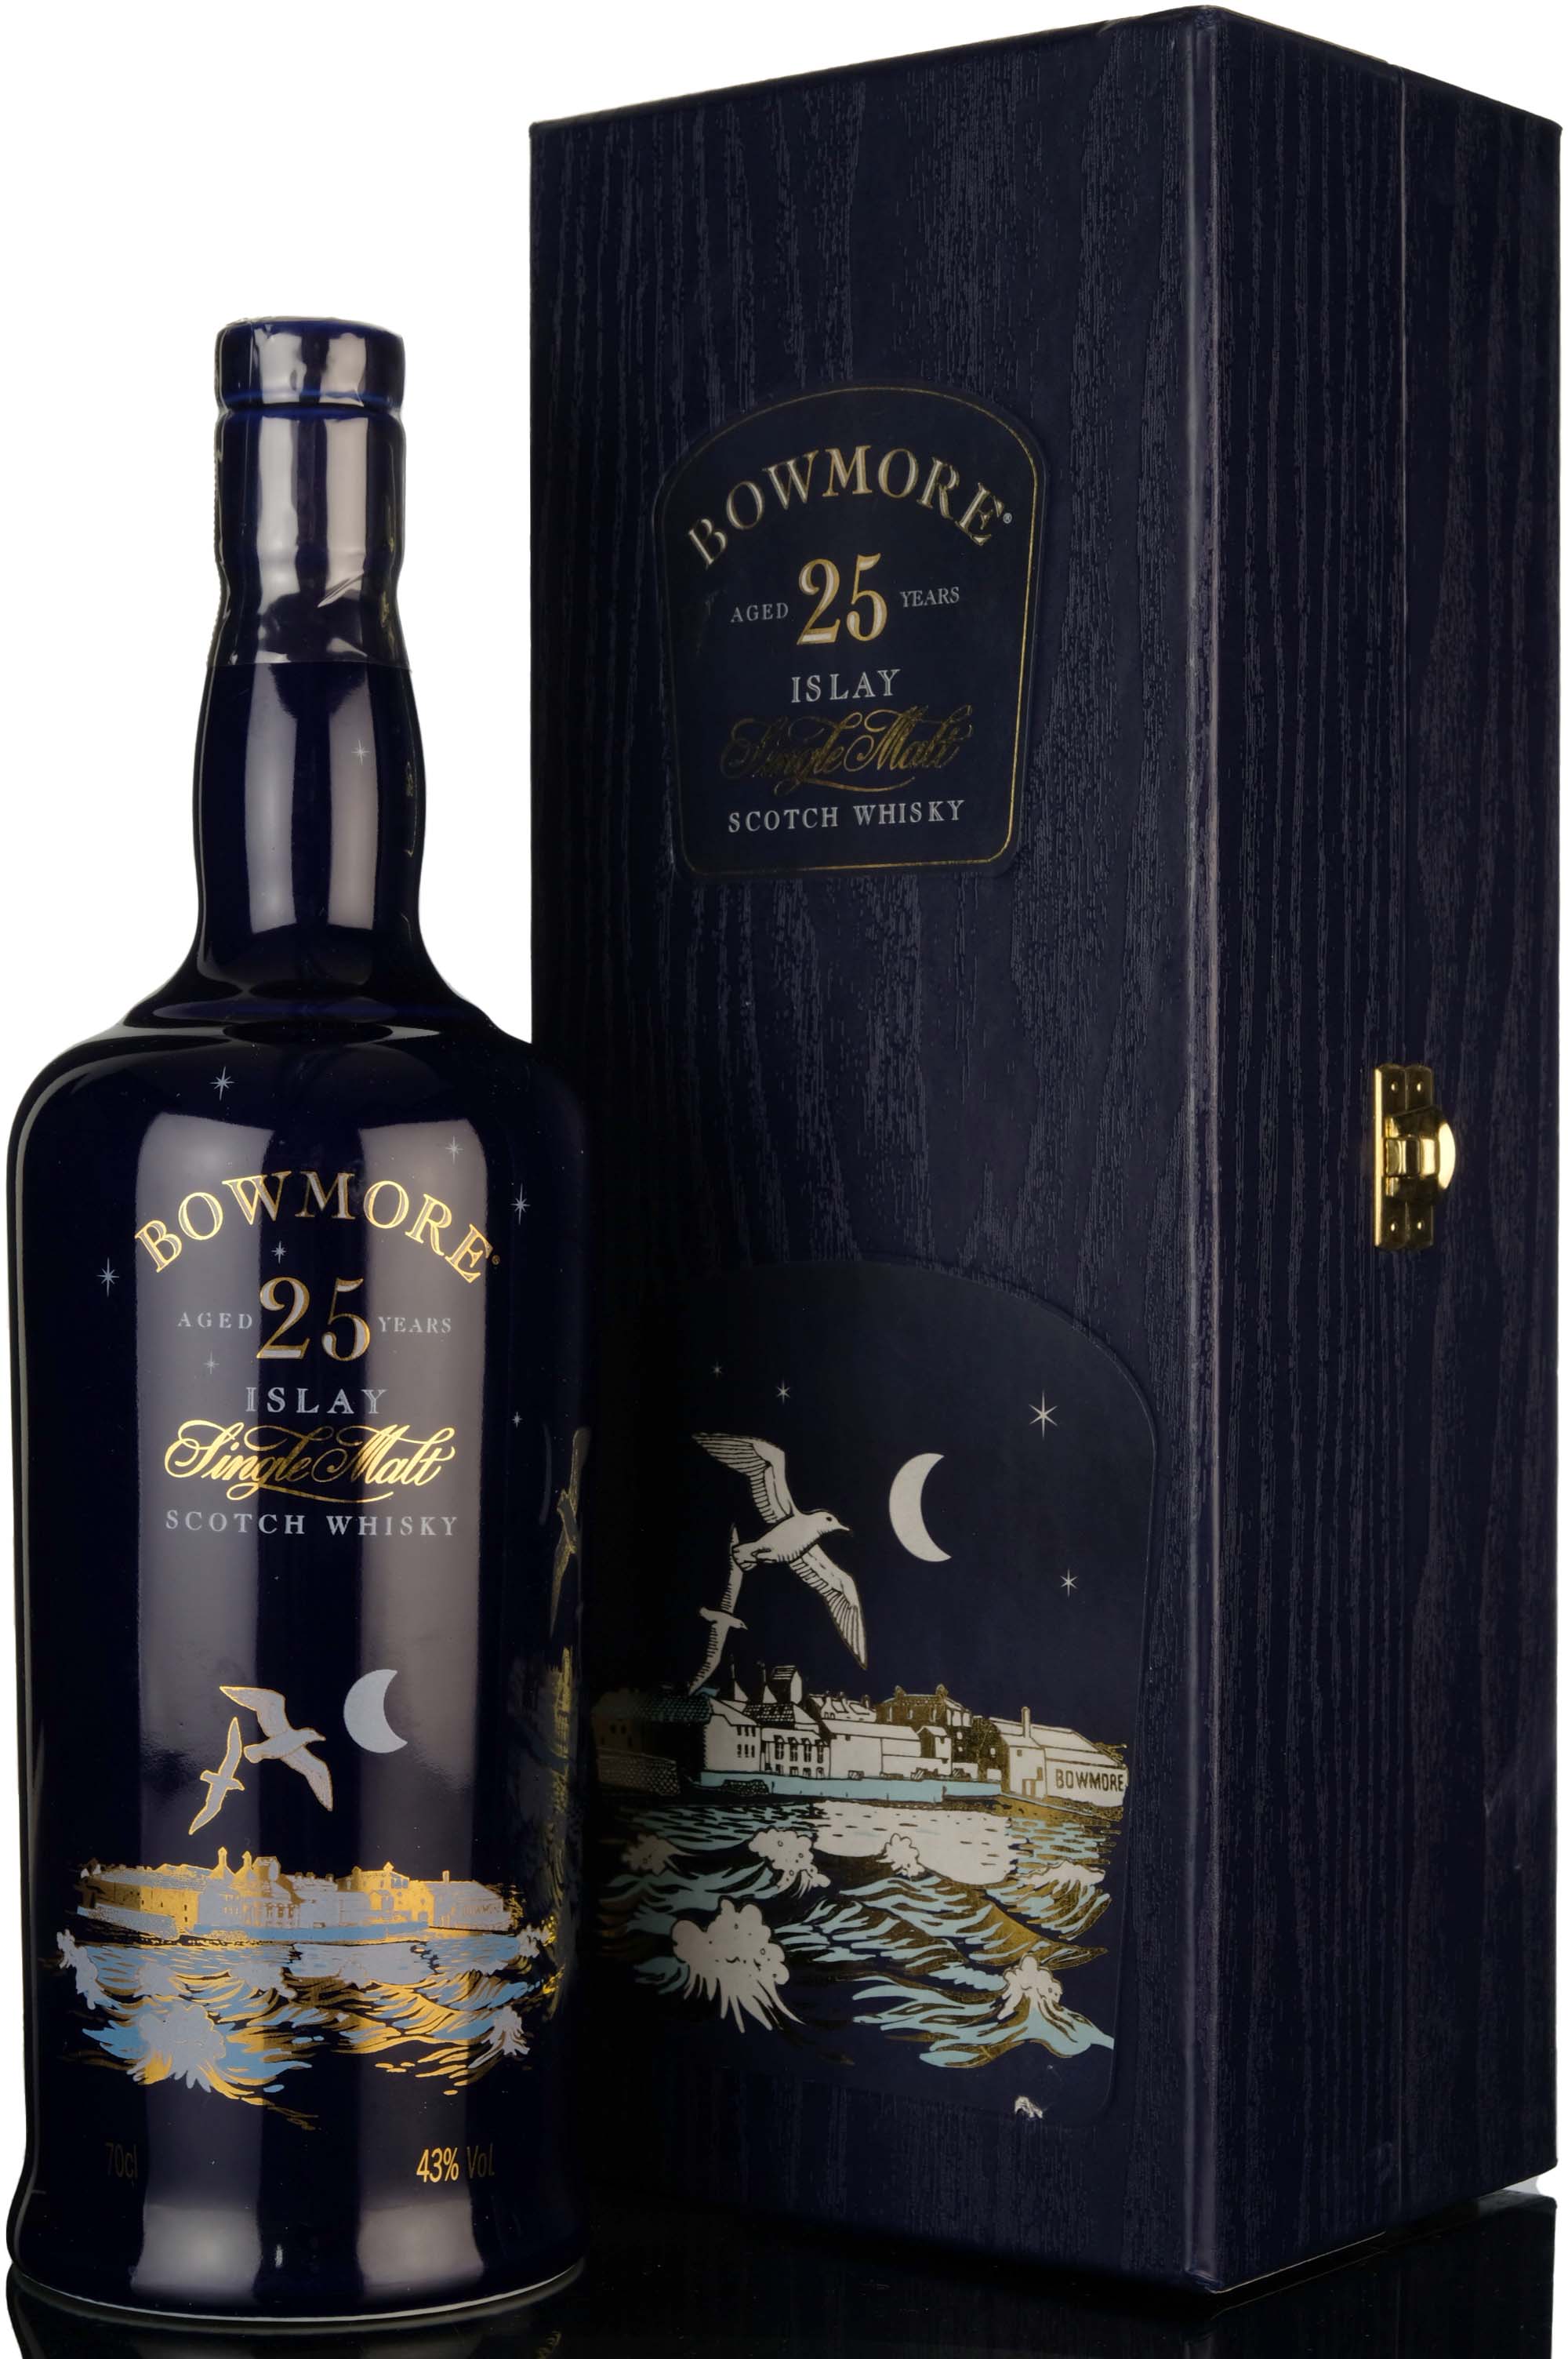 Bowmore 25 Year Old - Seagulls - 1990s